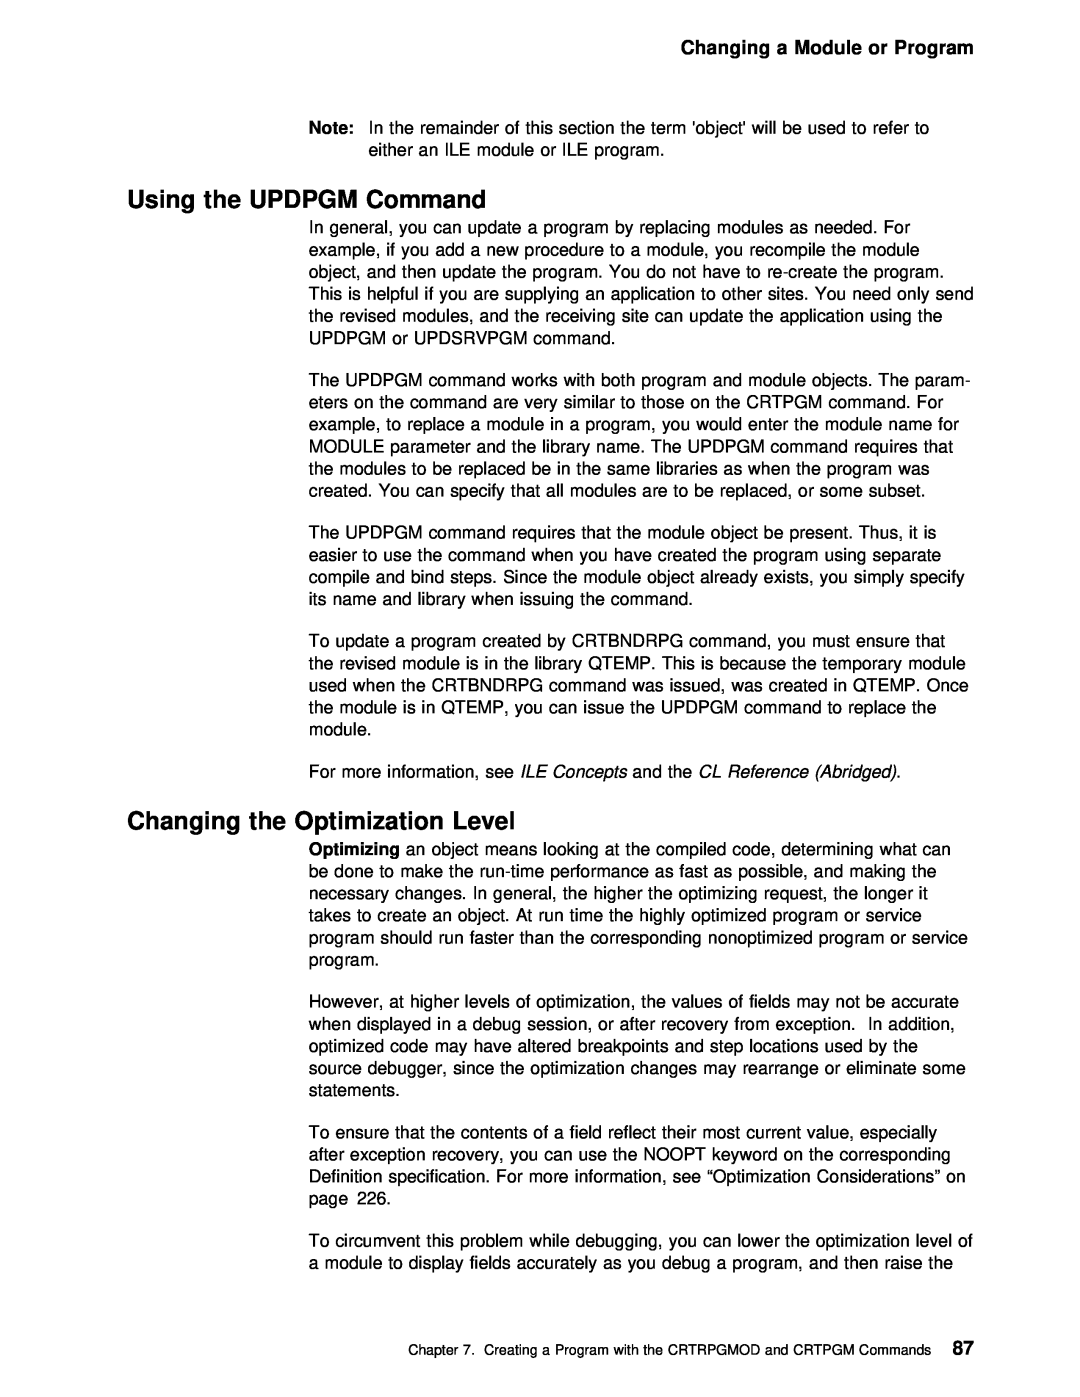 IBM AS/400 manual Using the UPDPGM Command, Level, Changing the Optimization, Changing a Module or Program 